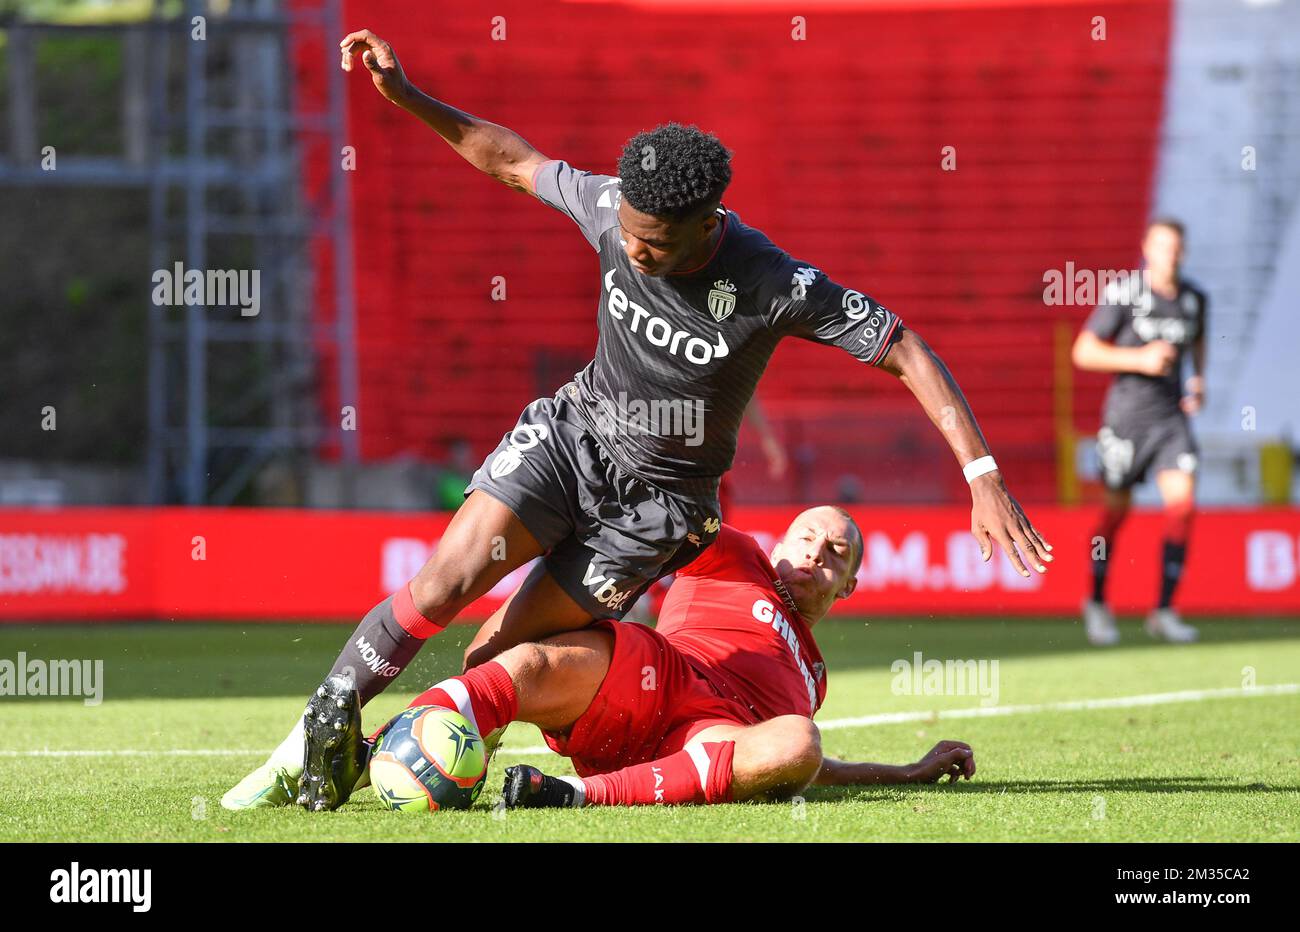 Monaco's Axel Disasi and Antwerp's Michael Frey fight for the ball during a friendly soccer game between Belgian Royal Antwerp FC and French AS Monaco, Saturday 17 July 2021 in Antwerp. BELGA PHOTO DAVID CATRY Stock Photo